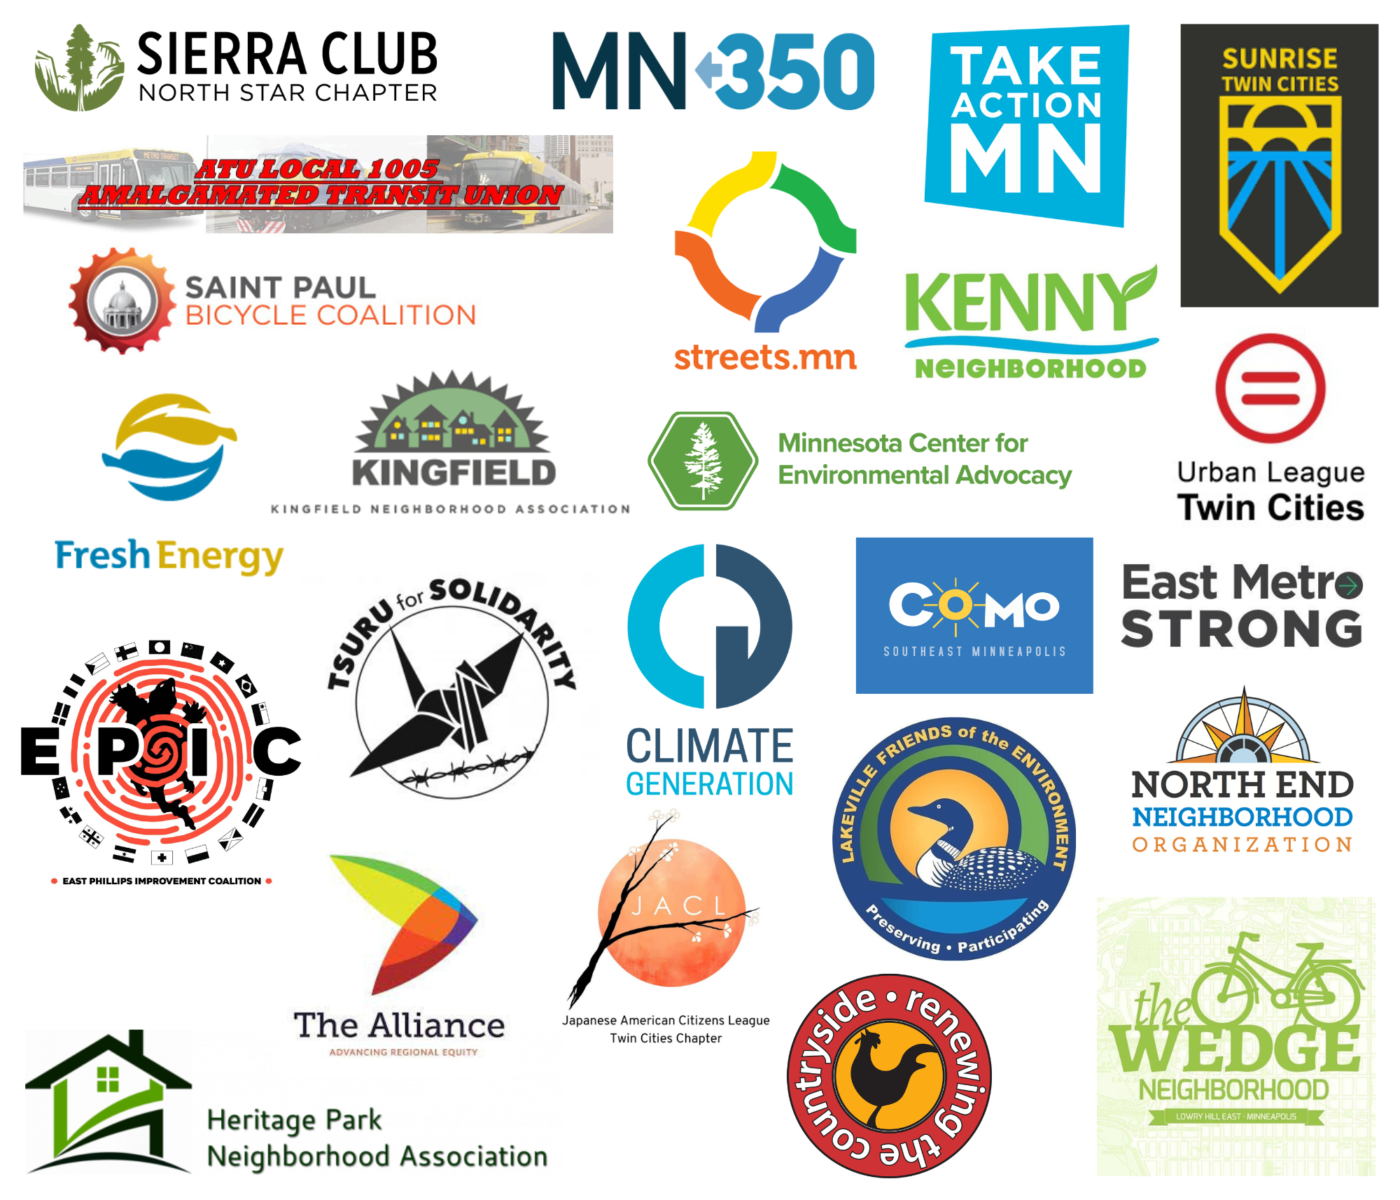 Logos of co-signing organizations: Sierra Club North Star Chapter, MN350, Take Action Minnesota, Sunrise Twin Cities, ATU Local 1005 Amalgamated Transit Union, Streets.mn, Saint Paul Bicycle Coalition, Kenny Neighborhood, Urban League Twin Cities, Kingfield Neighborhood Association, Minnesota Center for Environmental Advocacy, Fresh Energy, East Phillips Improvement Coalition, Tsuru for Solidarity, Climate Generation, Como Southeast Minneapolis, East Metro Strong, North End Neighborhood Organization, Lakeville Friends of the Environment, The Alliance, Japanese American Citizens League Twin Cities Chapter, Heritage Park Neighborhood Association, Renewing the Countryside, The Wedge Neighborhood